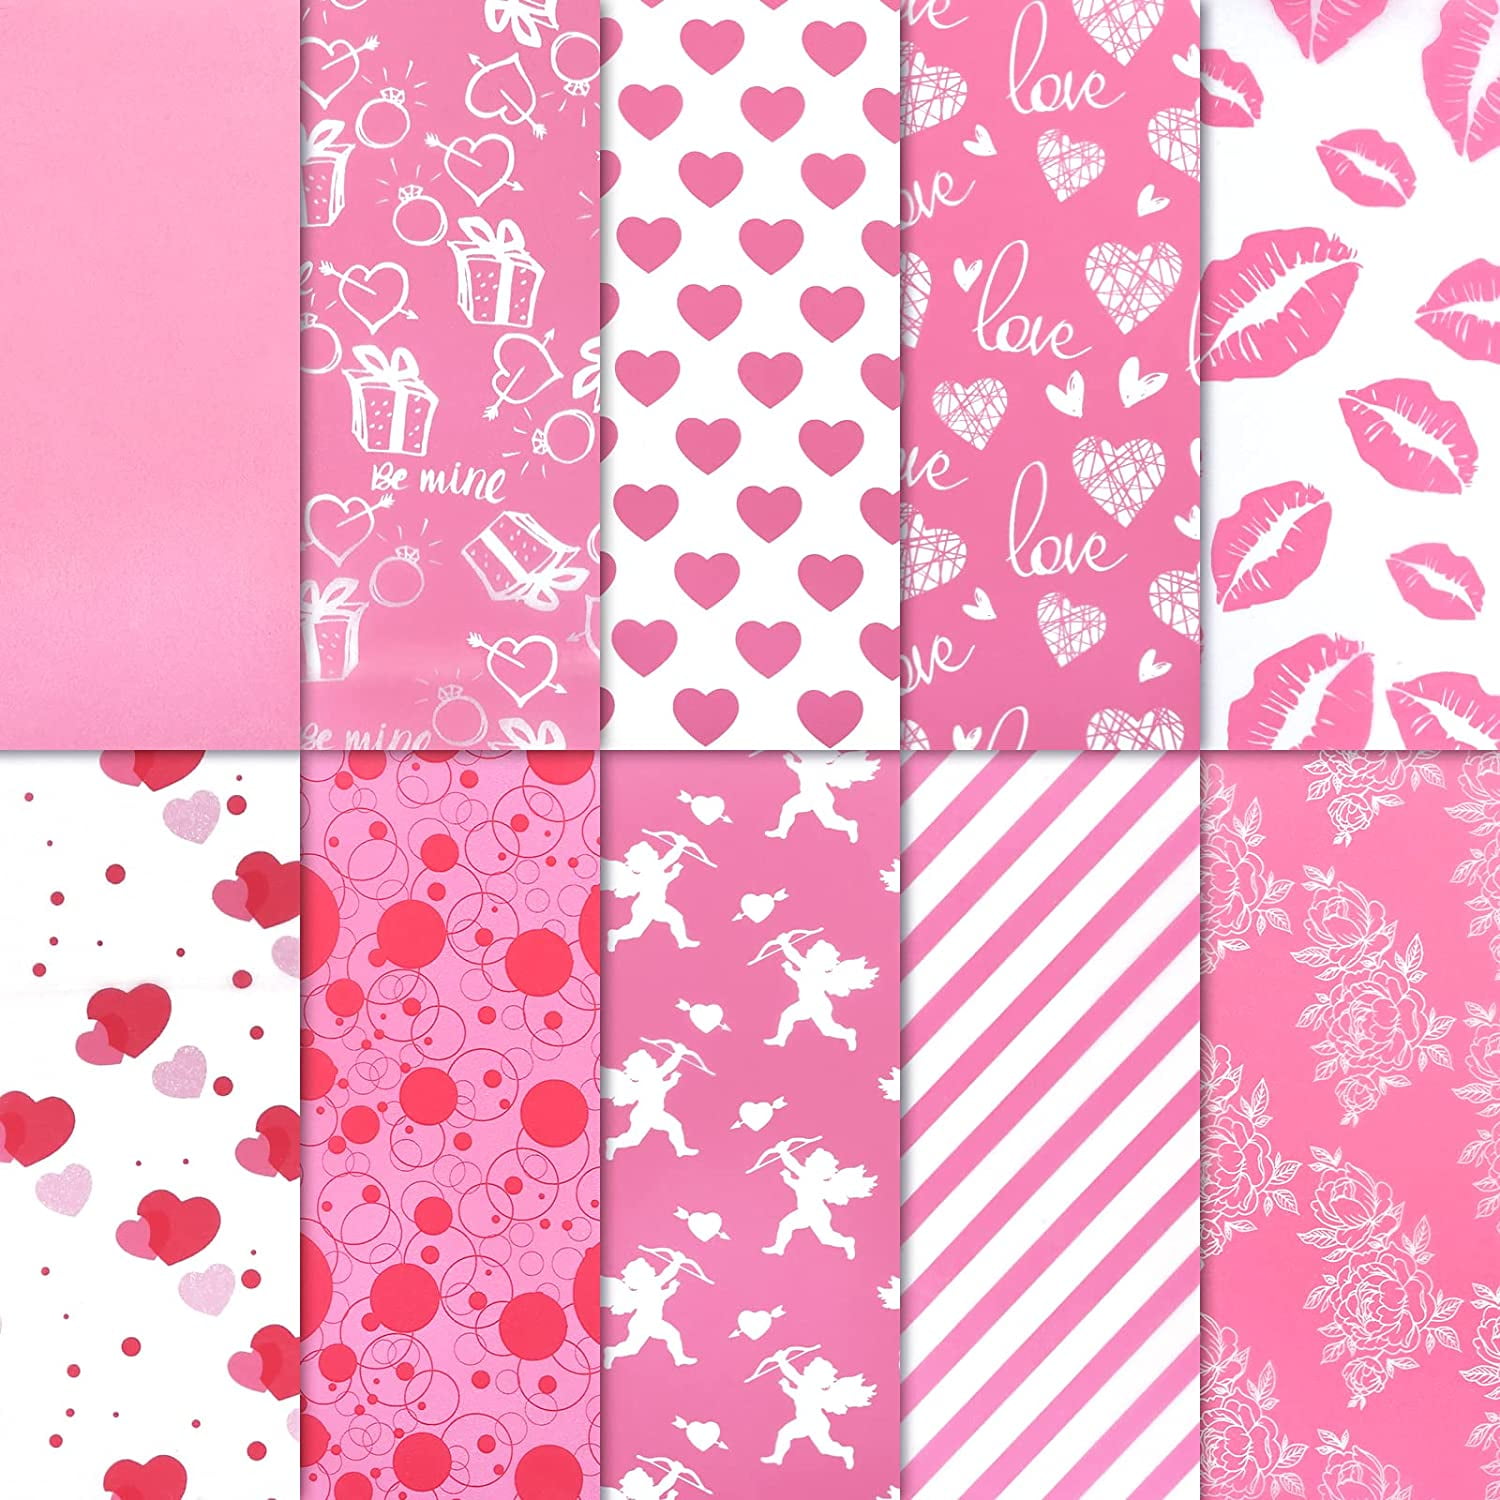  MIAHART 60 Sheets Gift Wrapping Tissue Paper Assorted 50 * 35cm  Valentine's Day Tissue Paper Bulk 3 Designs Art Paper for Valentine's Day,  Wedding, DIY Crafts, Wrapping Accessory, Gift Decorations : Health &  Household